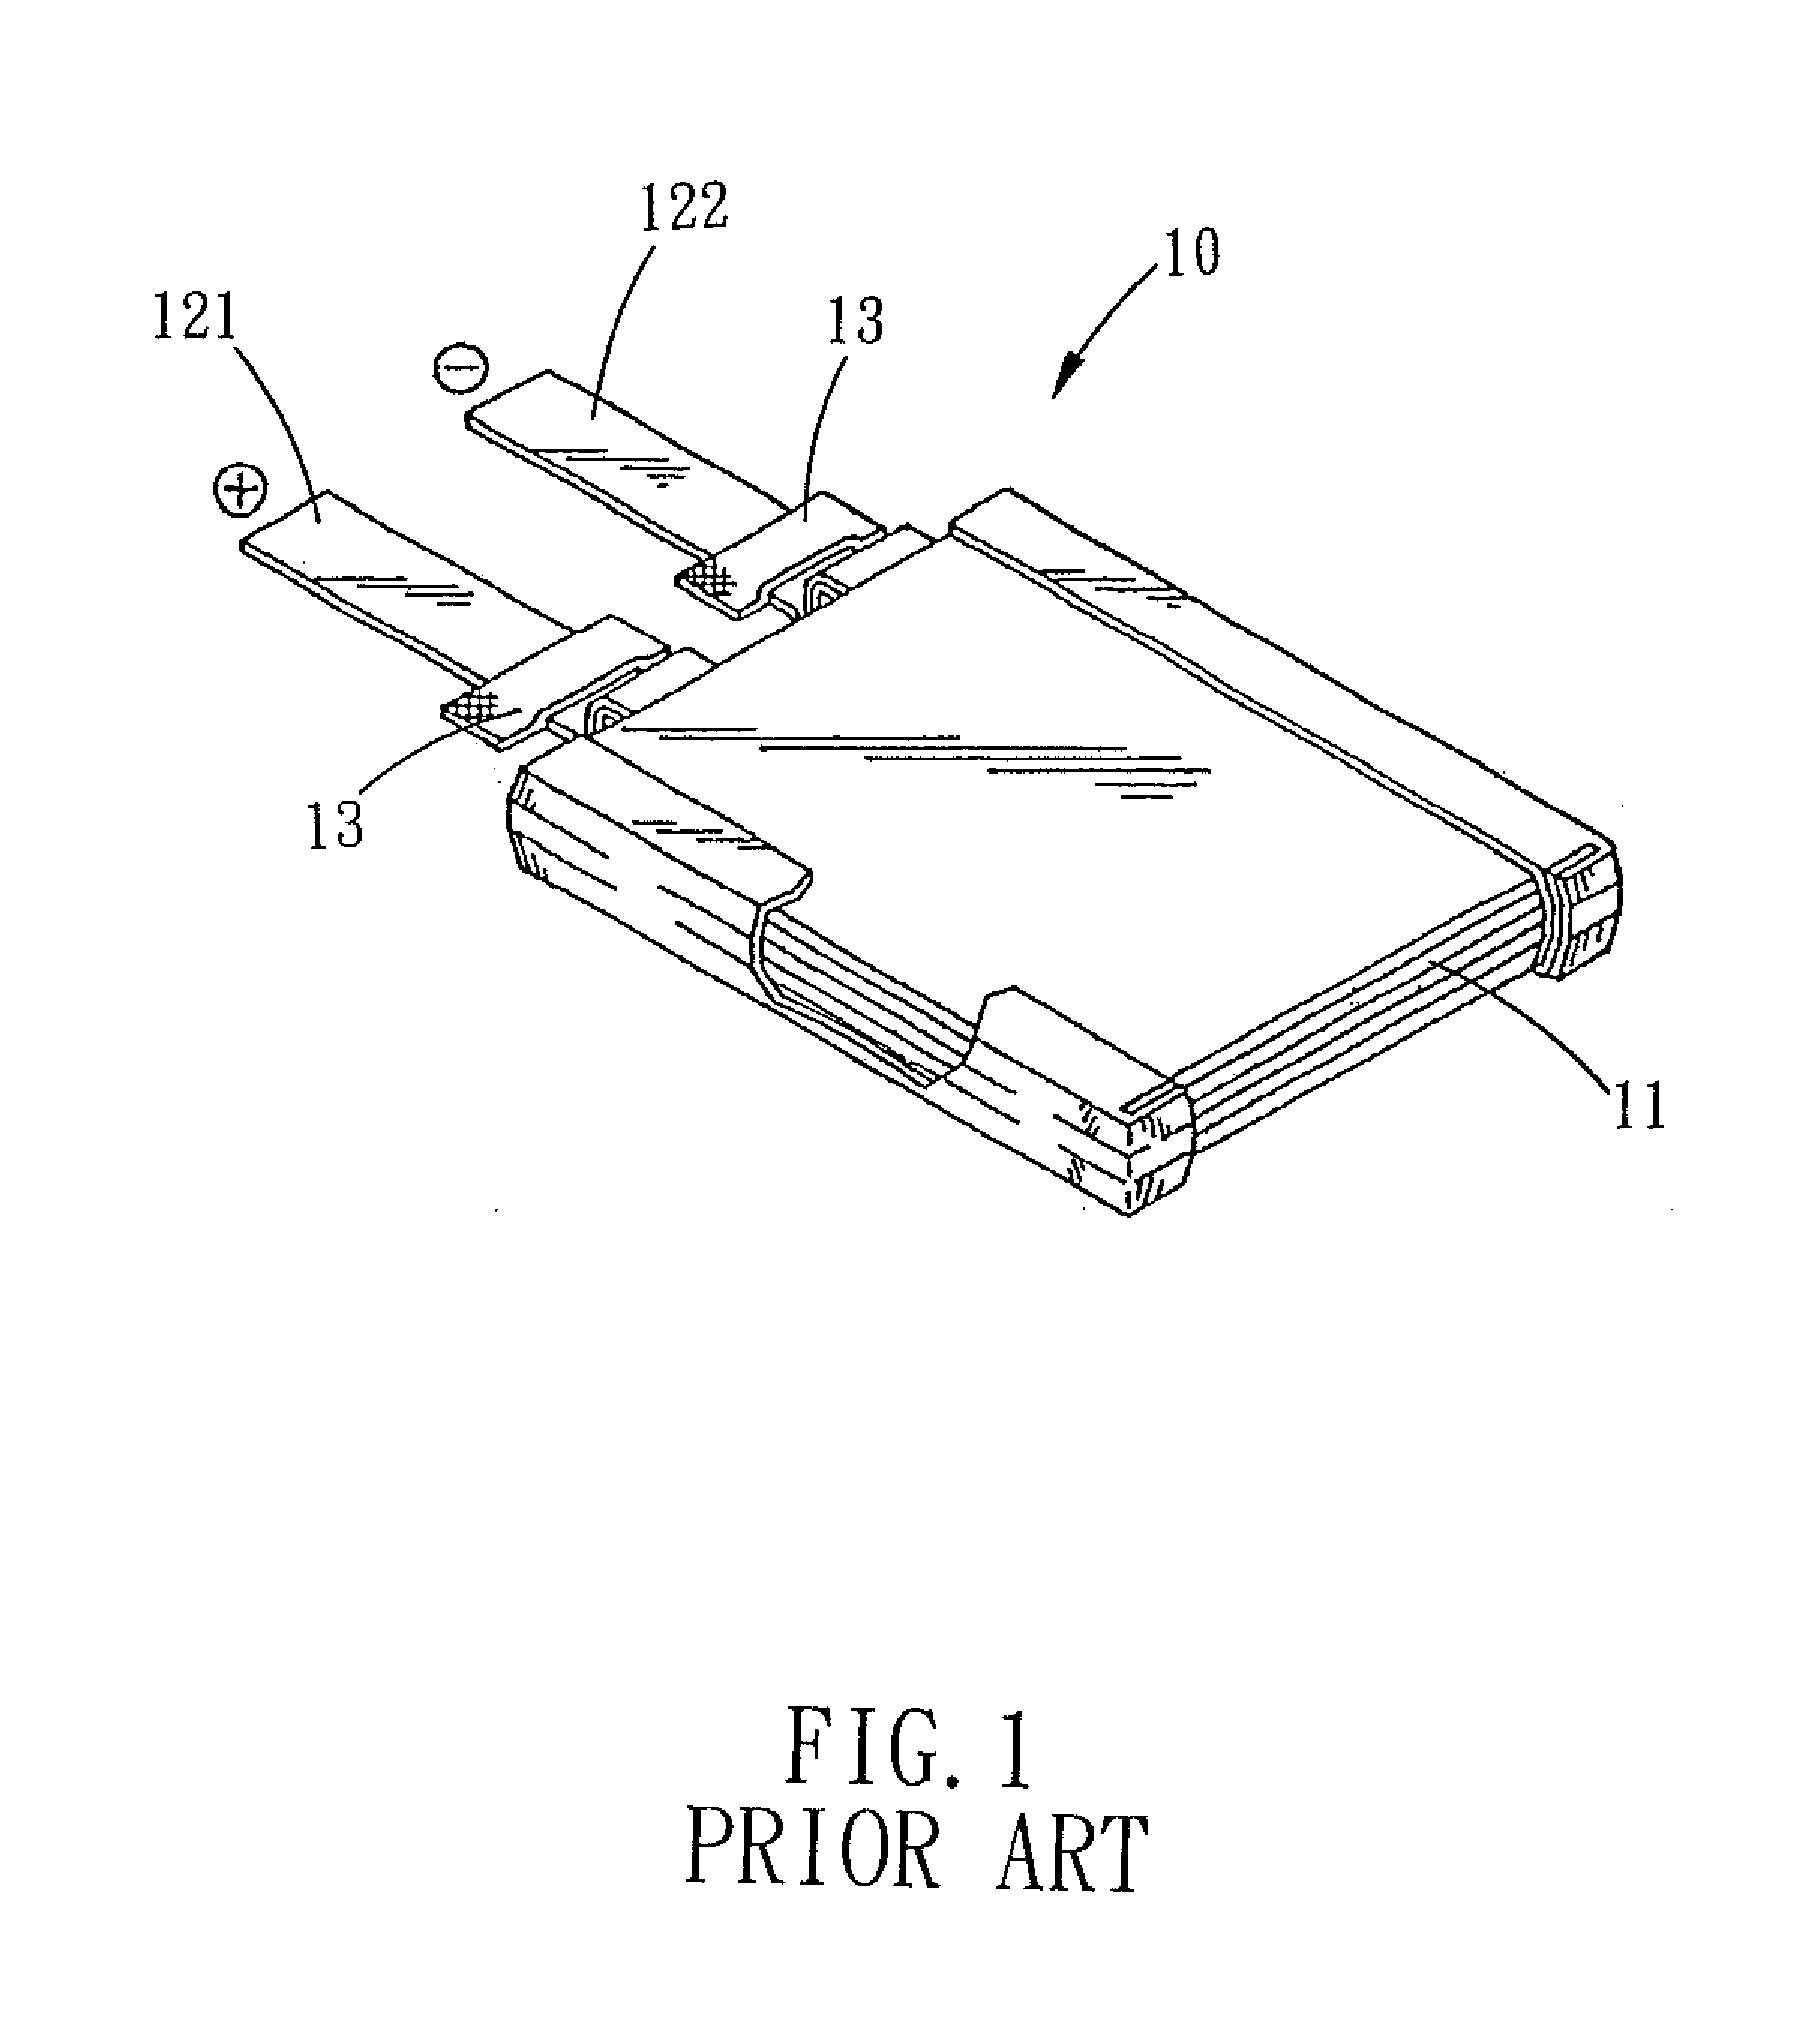 Core Structure for a Square Lithium Secondary Battery